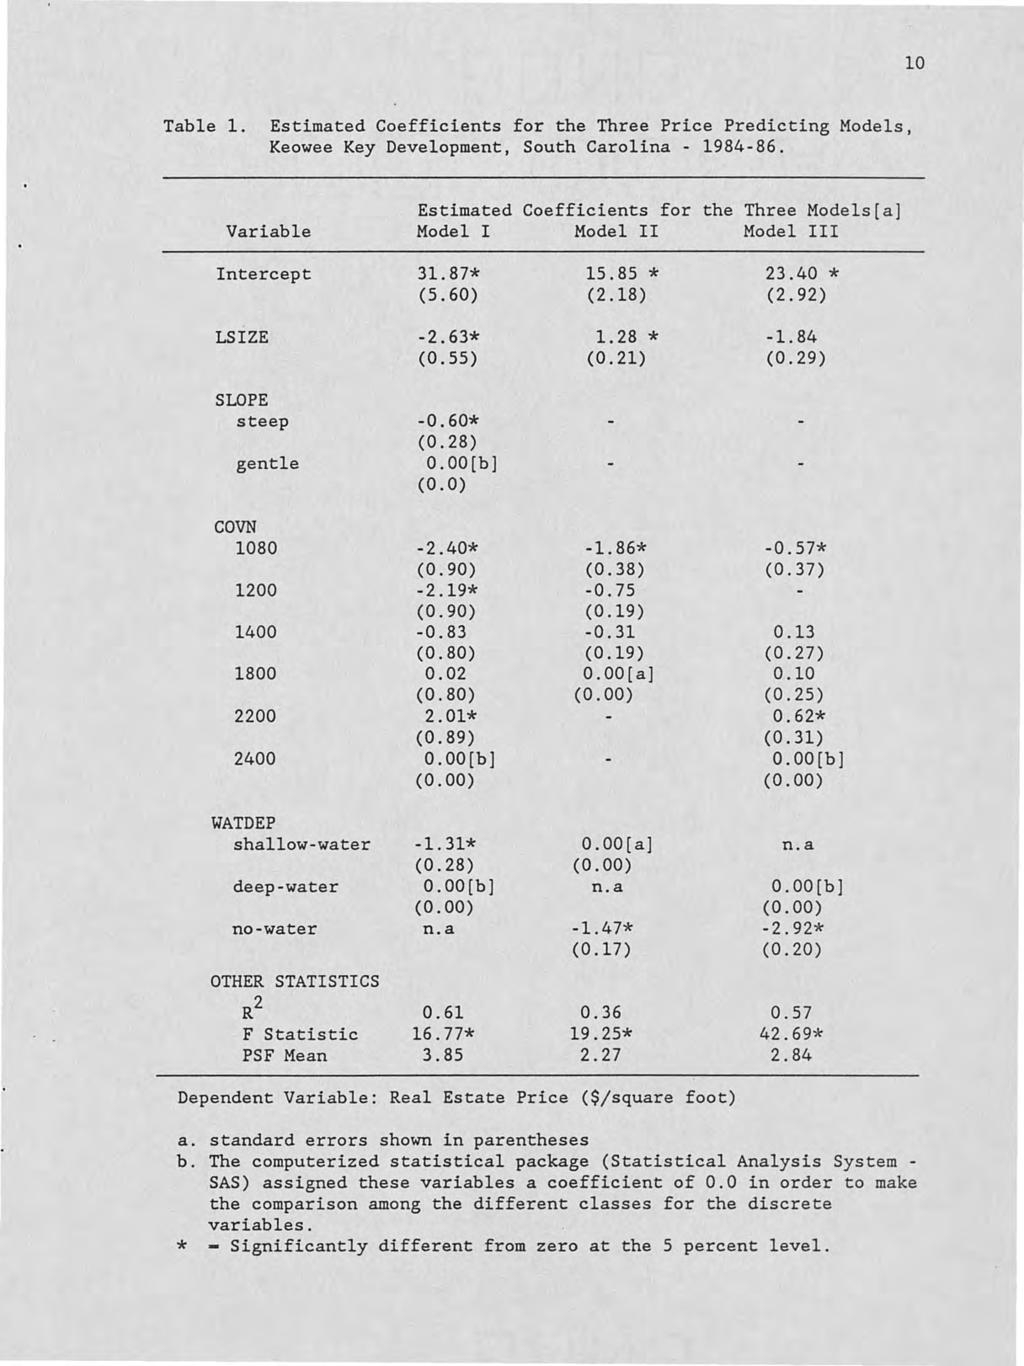 10 Table 1. Estimated Coefficients for the Three Price Predicting Models, Keowee Key Development, South Carolina - 1984-86.